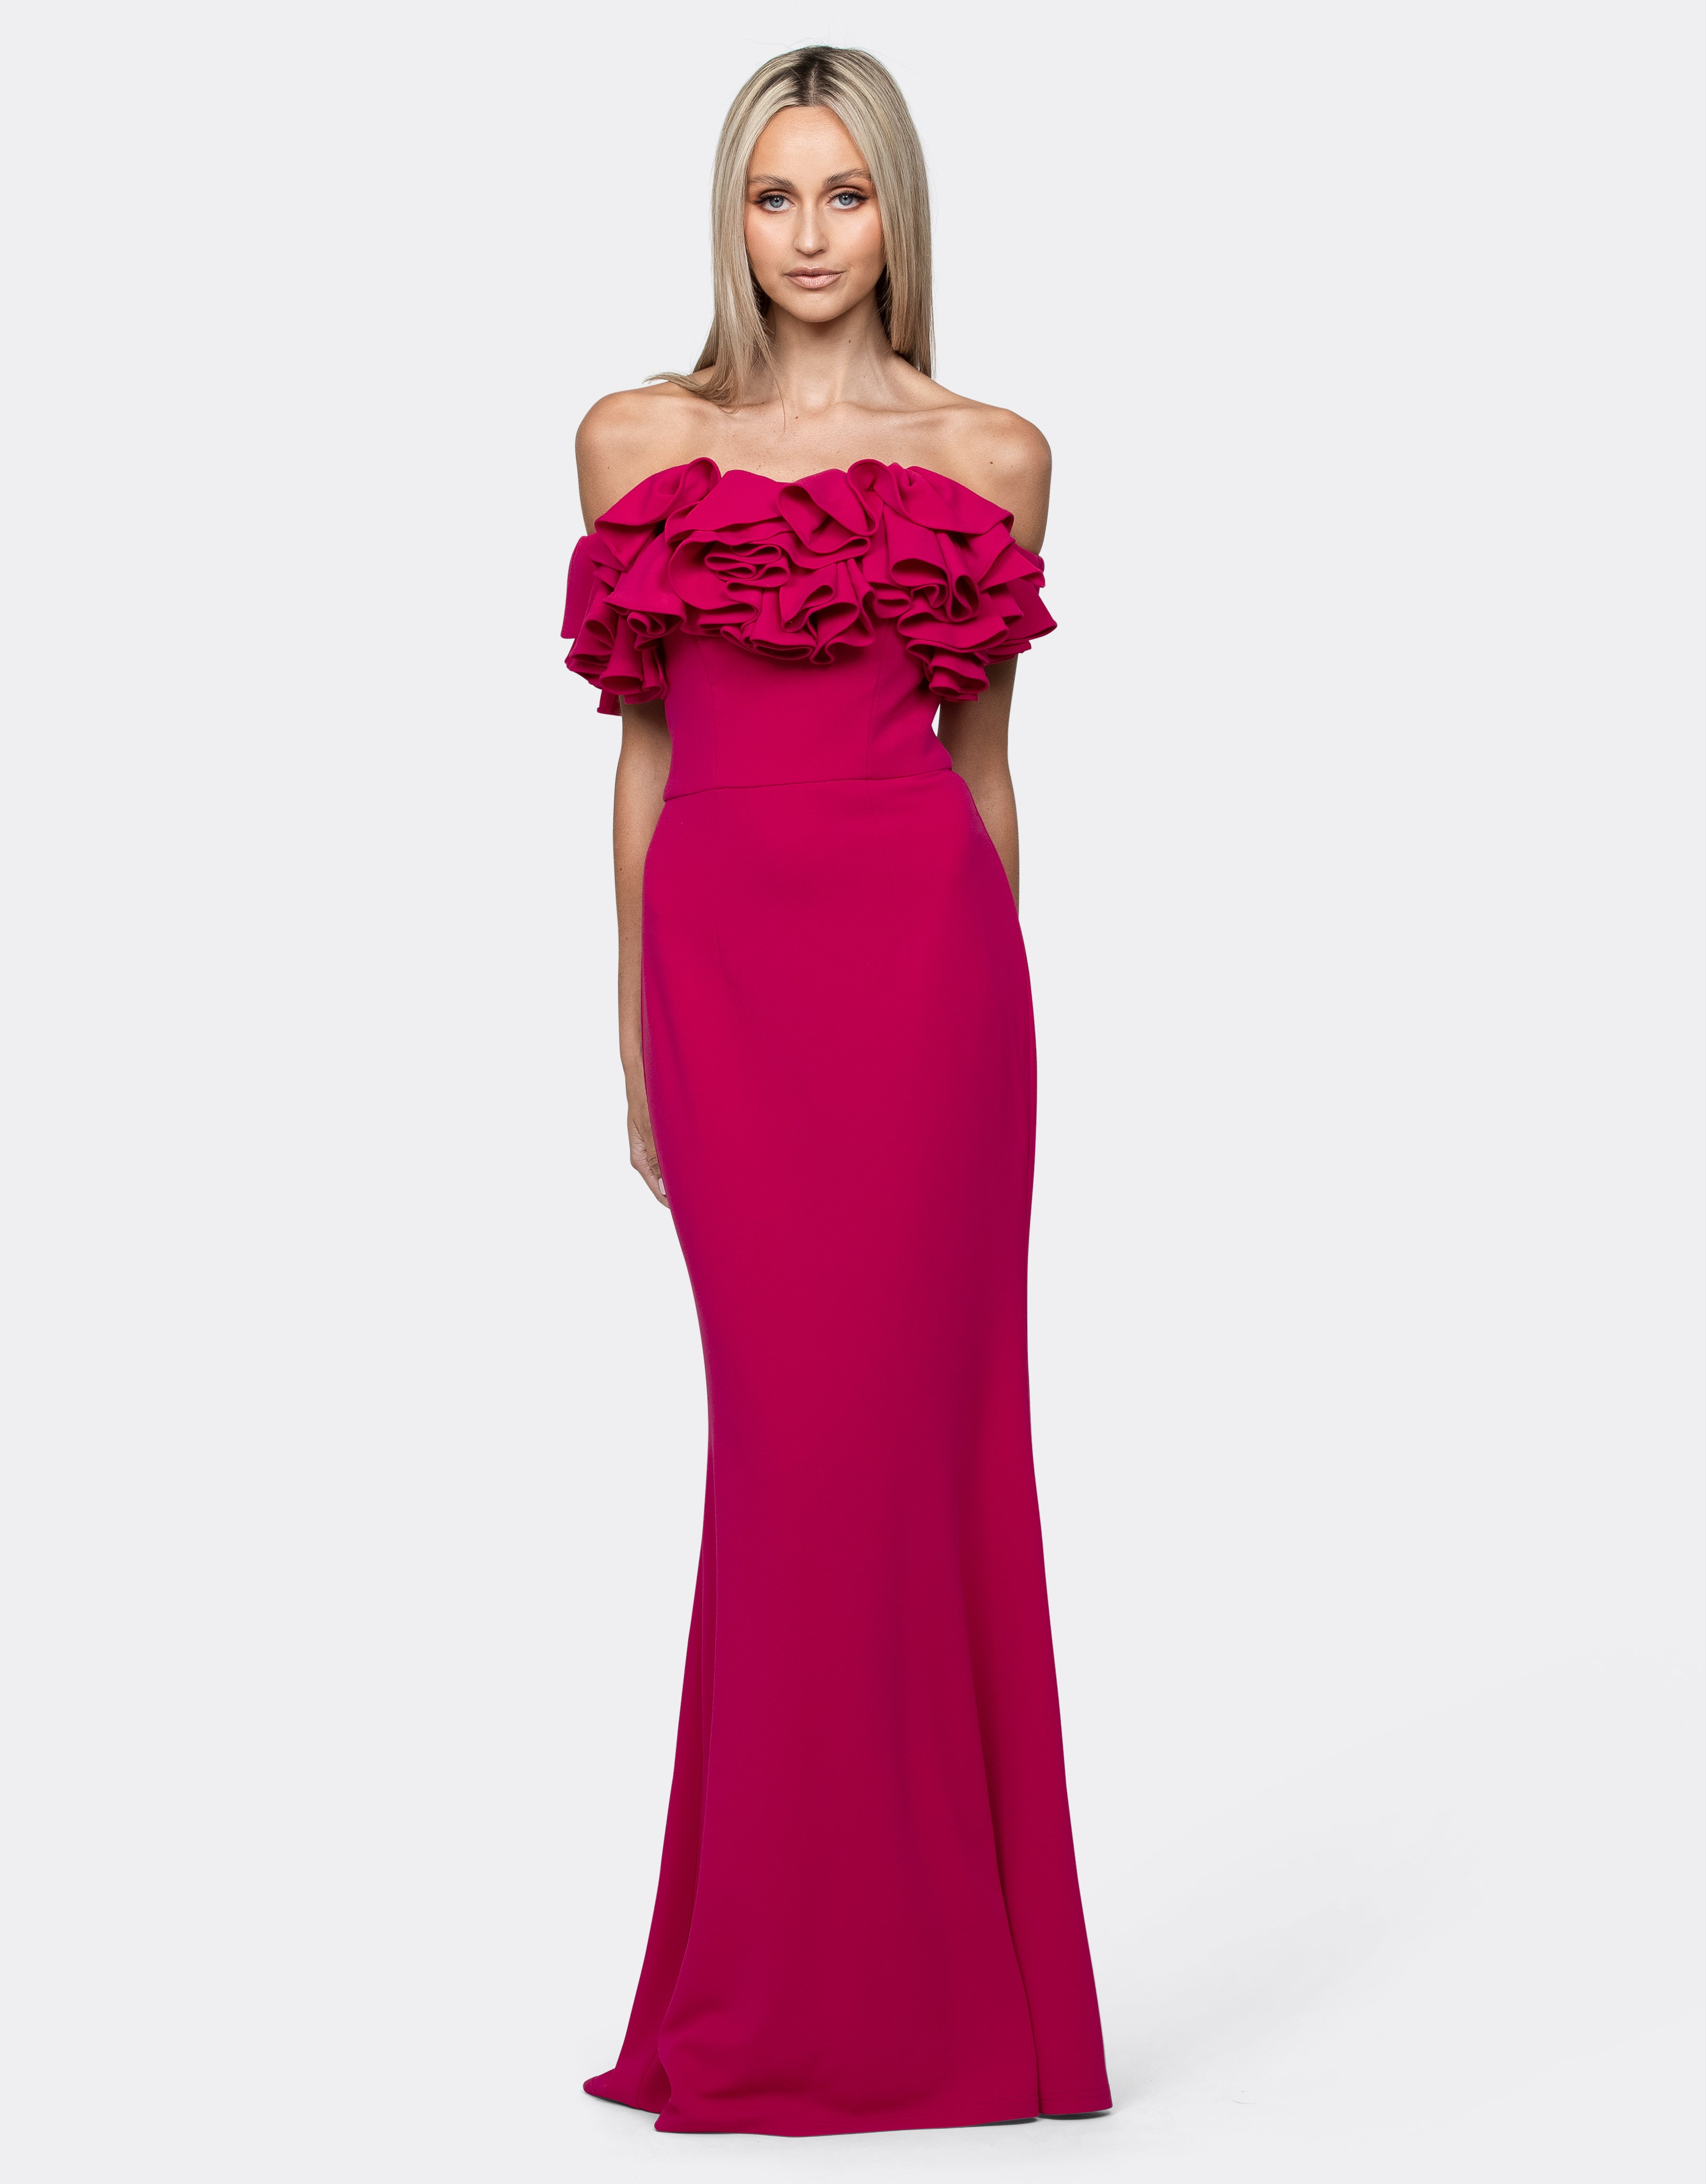 Waverly off shoulder ruffle gown